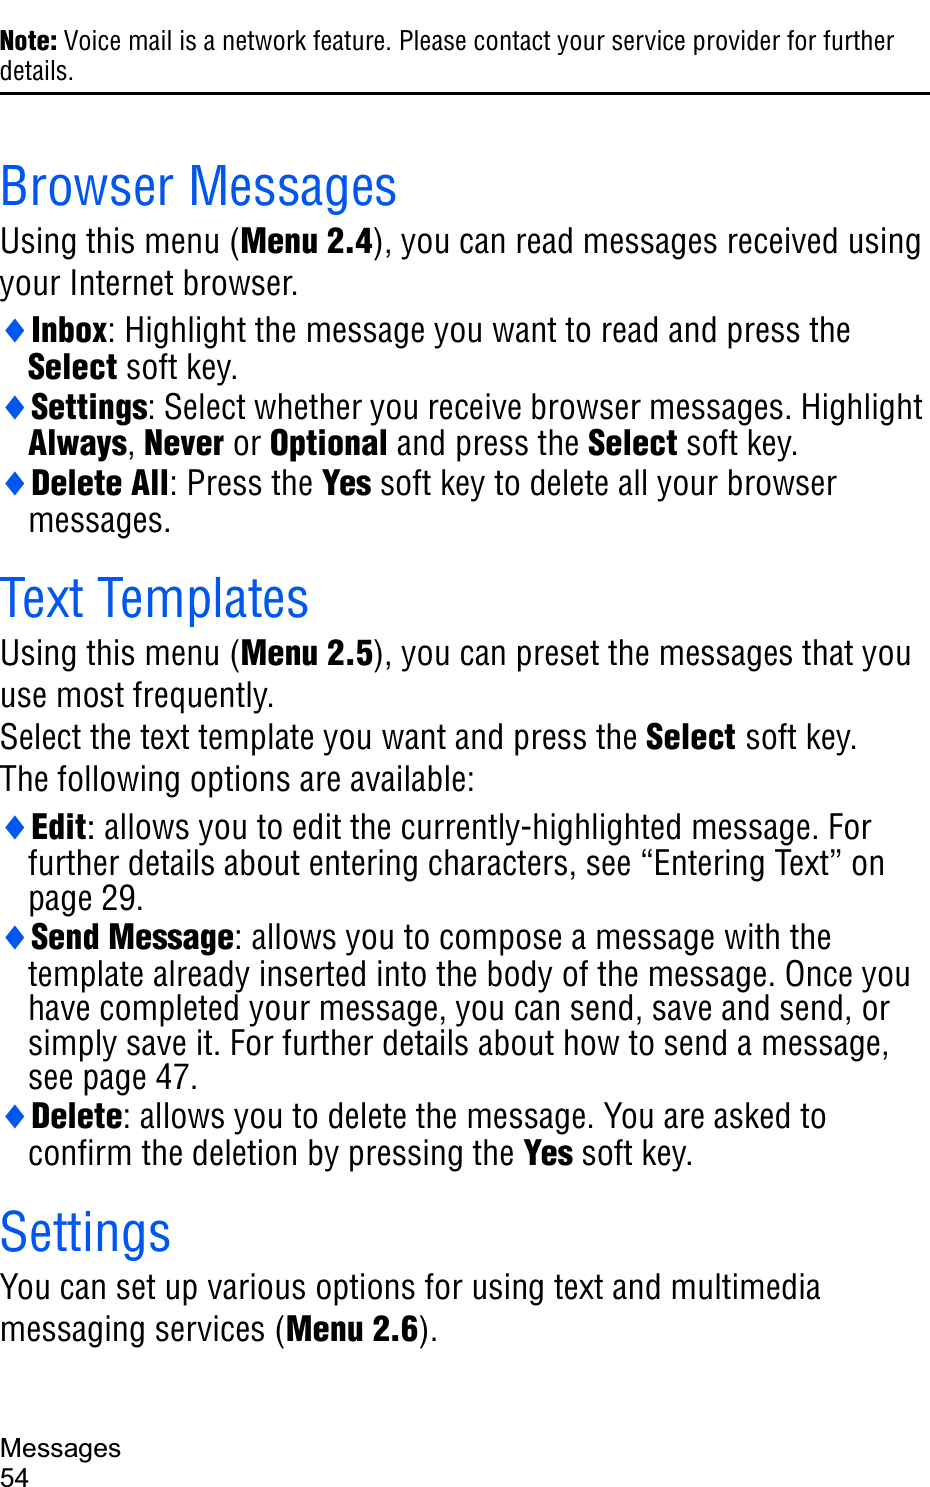 Messages54Note: Voice mail is a network feature. Please contact your service provider for further details.Browser MessagesUsing this menu (Menu 2.4), you can read messages received using your Internet browser.iInbox: Highlight the message you want to read and press the Select soft key.iSettings: Select whether you receive browser messages. Highlight Always,Never or Optional and press the Select soft key.iDelete All: Press the Yes soft key to delete all your browser messages.Text TemplatesUsing this menu (Menu 2.5), you can preset the messages that you use most frequently. Select the text template you want and press the Select soft key.The following options are available:iEdit: allows you to edit the currently-highlighted message. For further details about entering characters, see “Entering Text” on page 29.iSend Message: allows you to compose a message with the template already inserted into the body of the message. Once you have completed your message, you can send, save and send, or simply save it. For further details about how to send a message, see page 47.iDelete: allows you to delete the message. You are asked to confirm the deletion by pressing the Yes soft key.SettingsYou can set up various options for using text and multimedia messaging services (Menu 2.6).